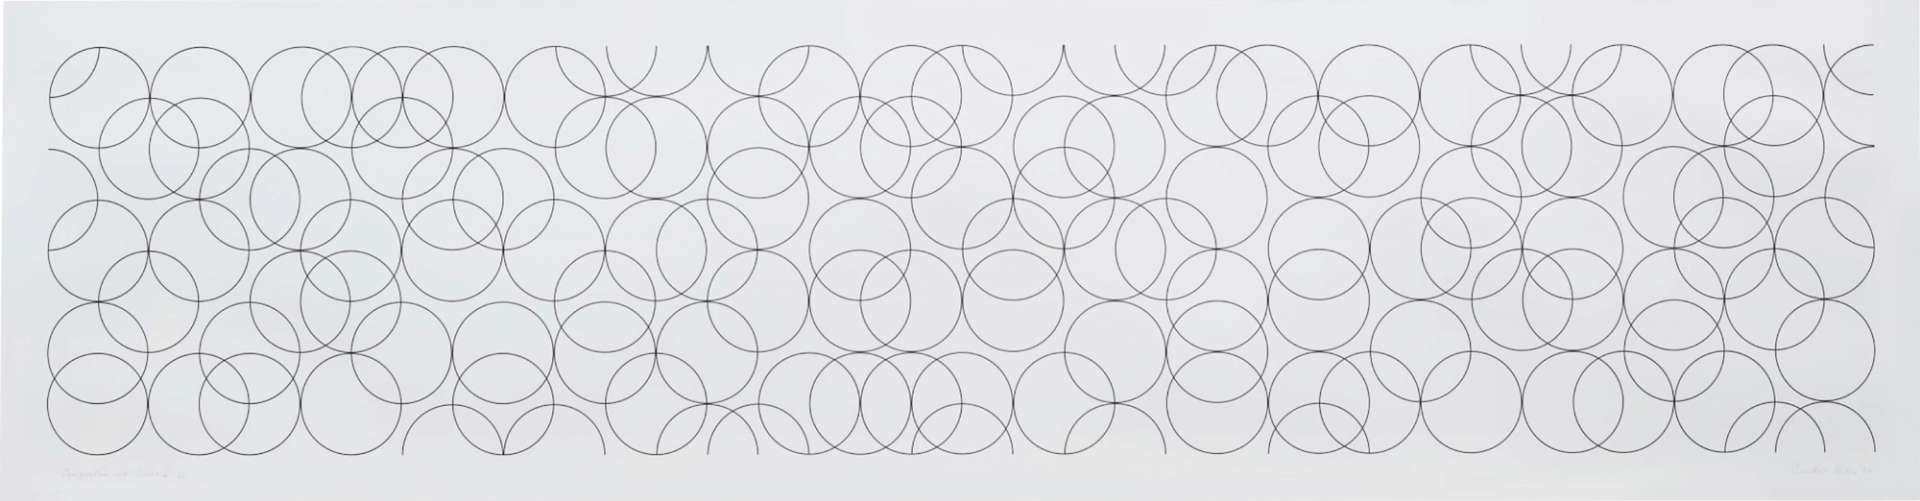 Bridget Riley’s Composition With Circles 4. An Op Art screenprint of rows of interlocking circles across a white background.